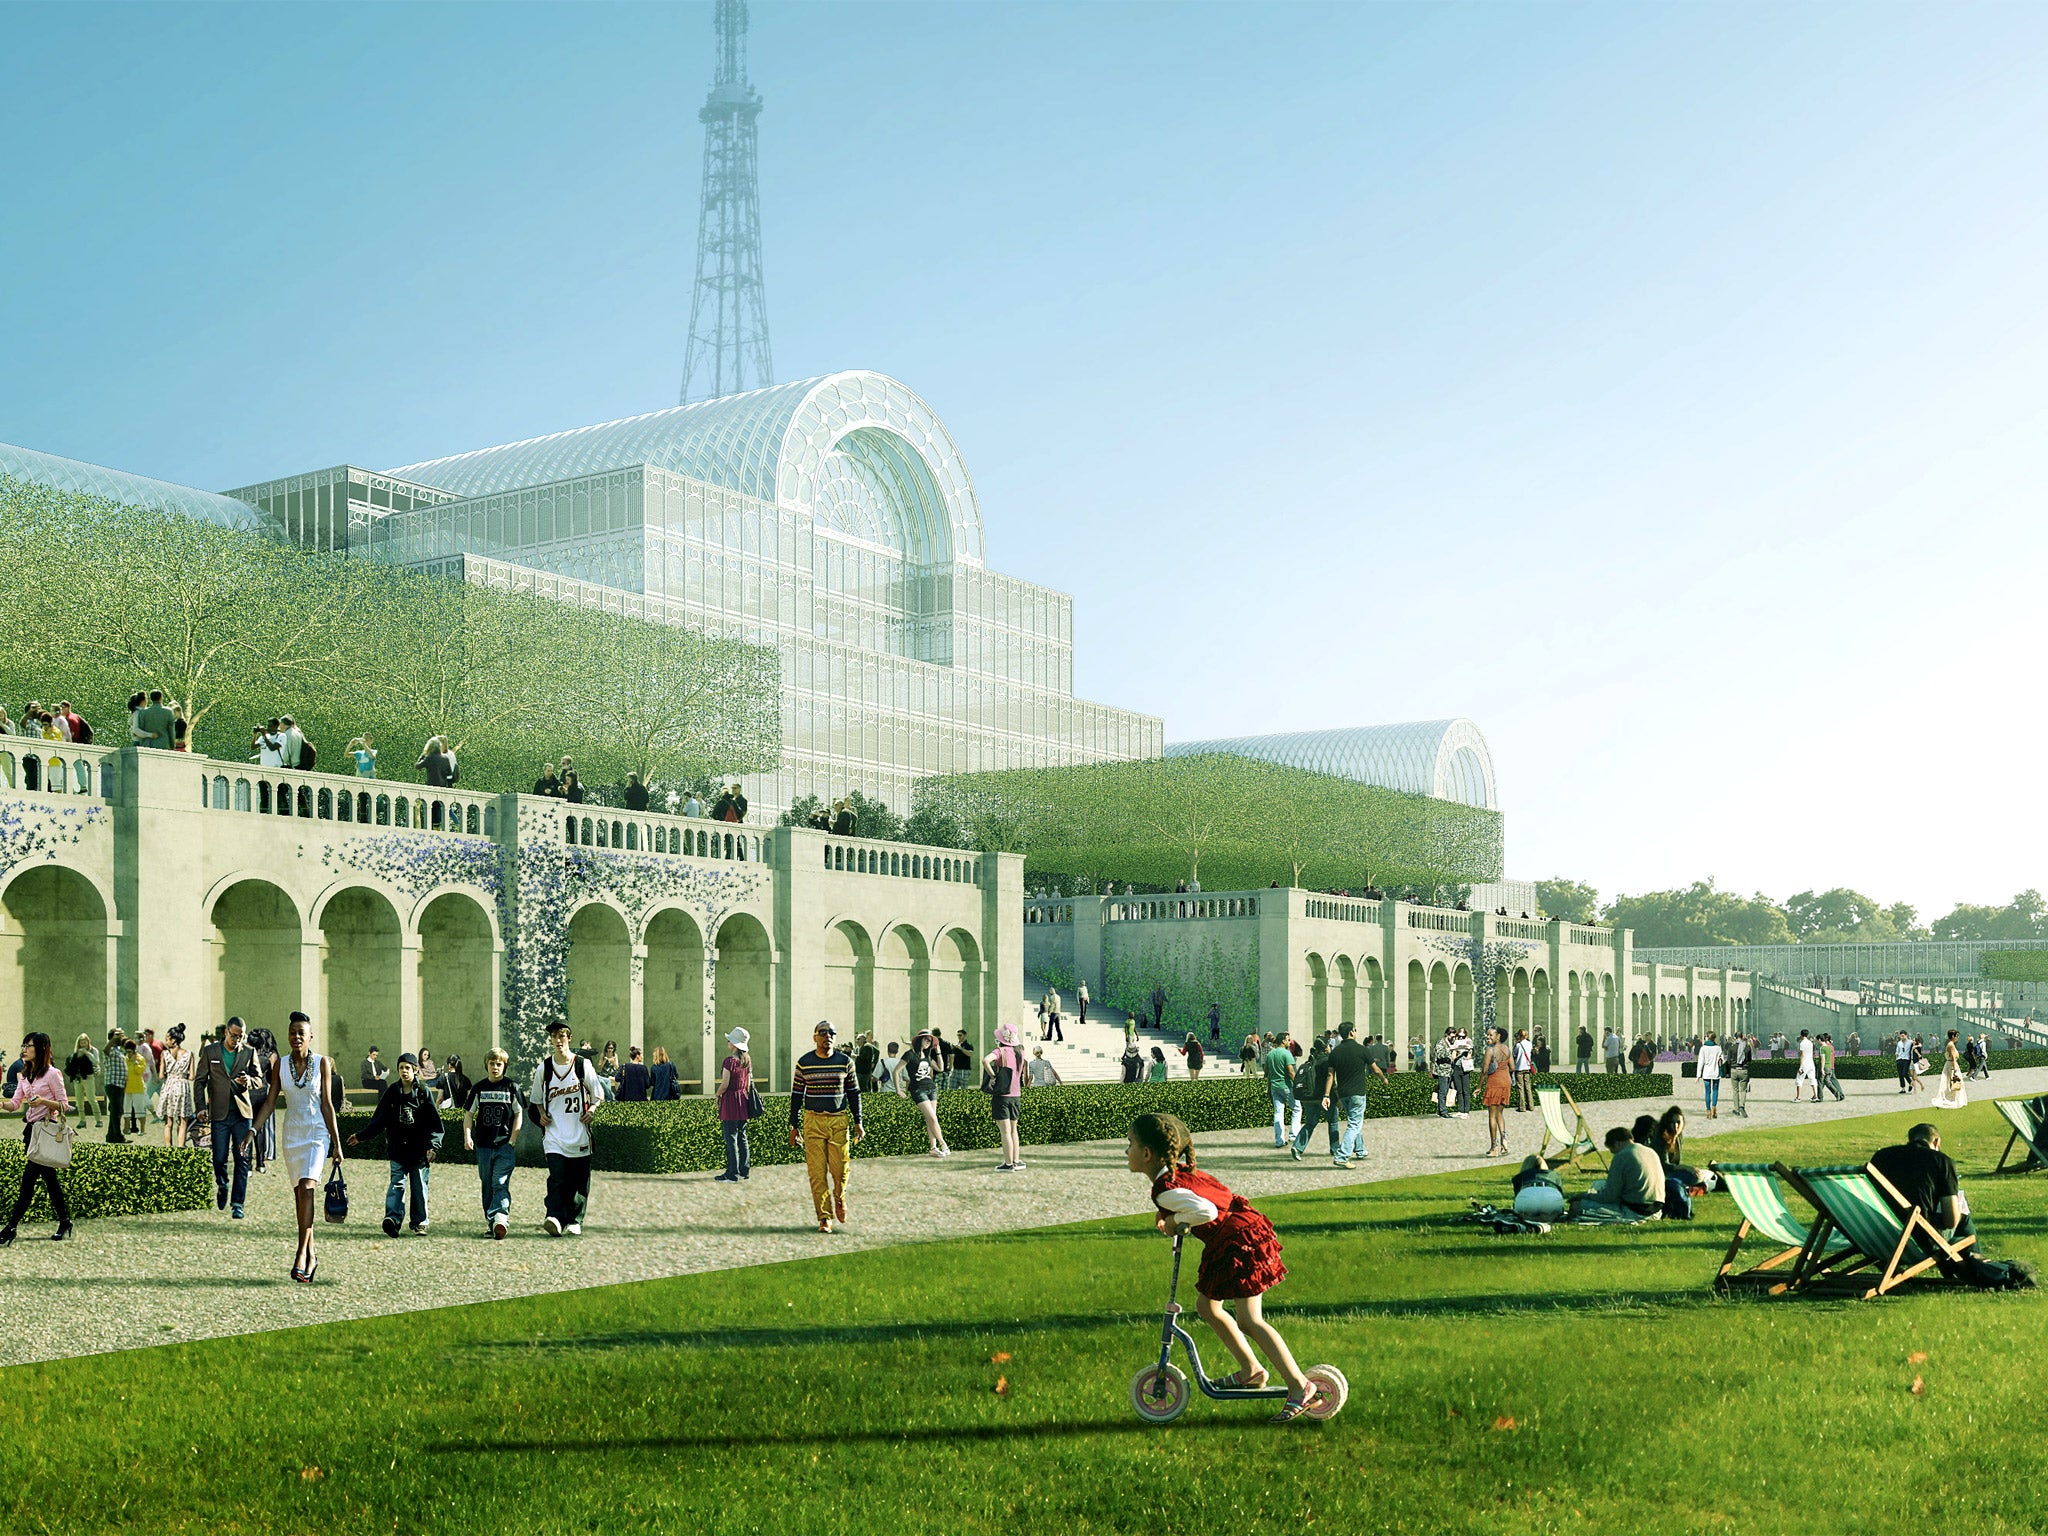 Heart of glass: an artist’s impression of how the new Crystal Palace would look